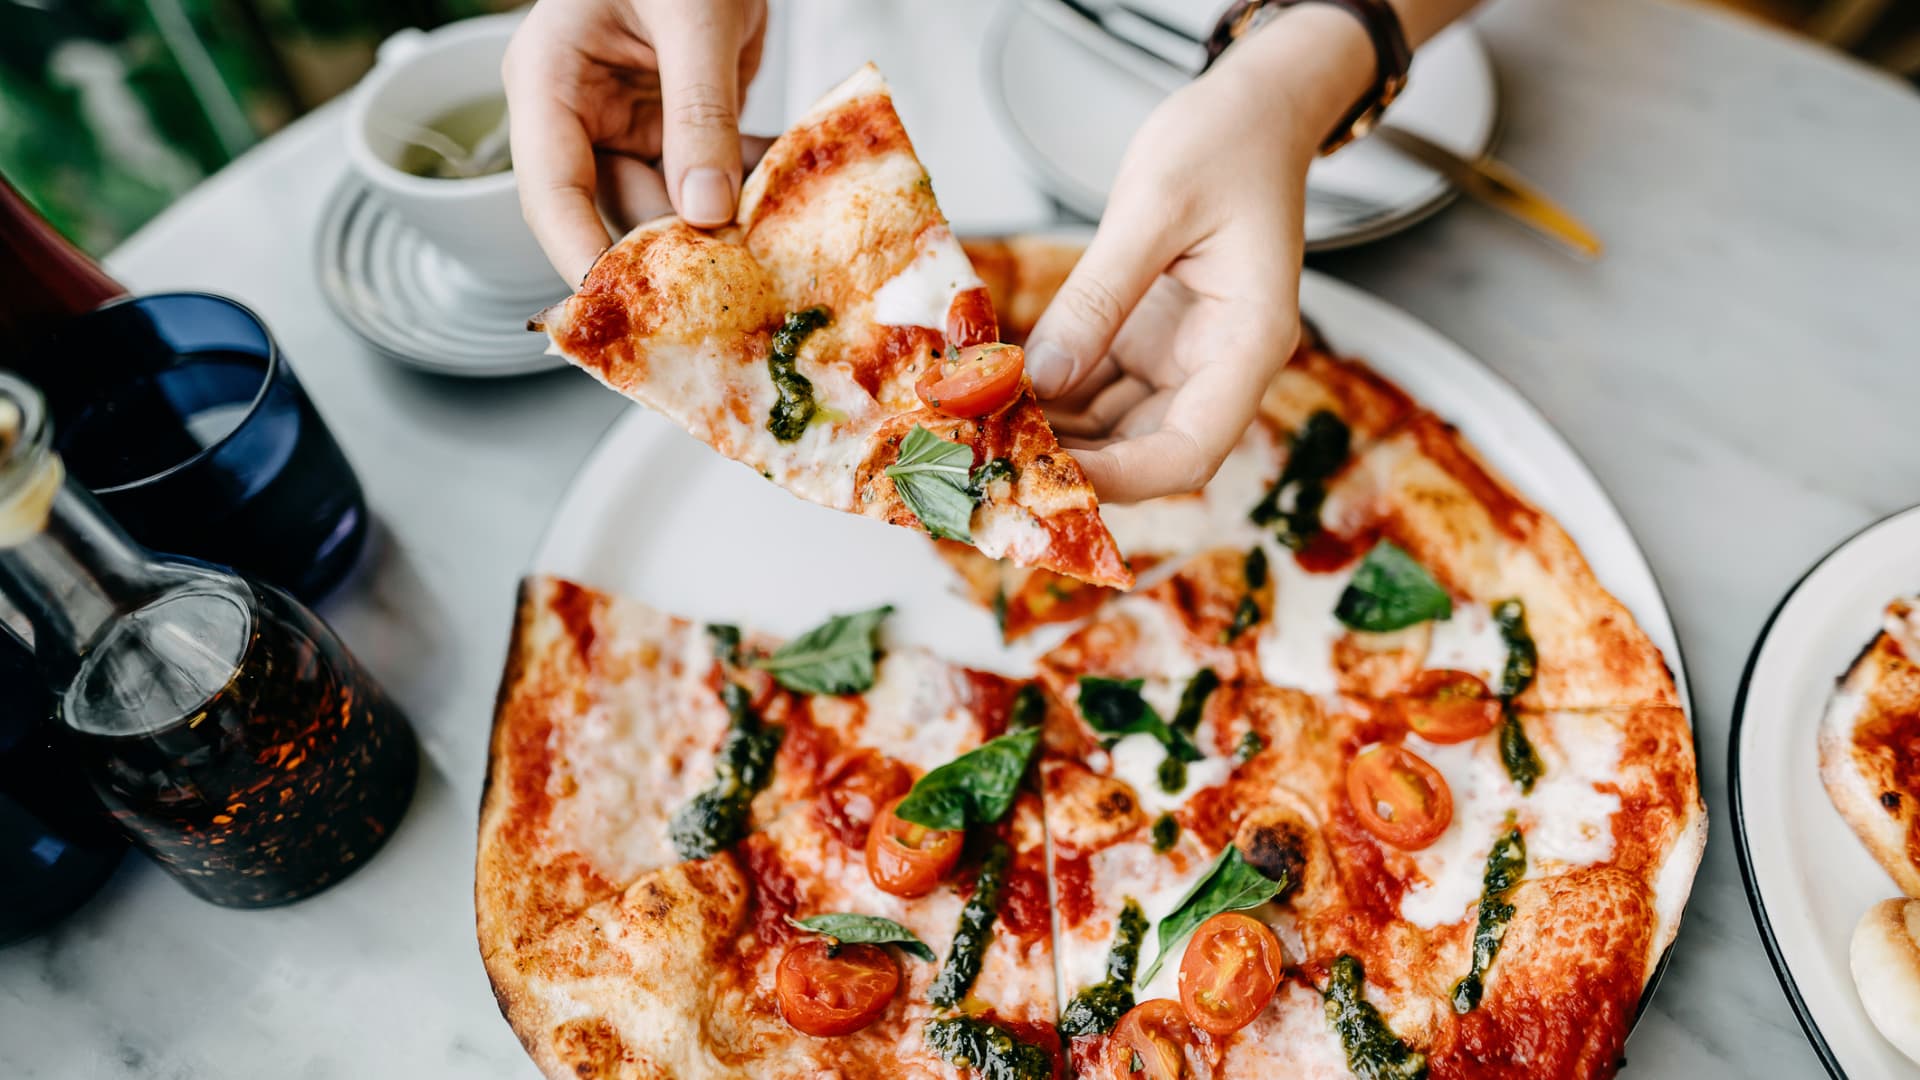 These 10 cities have the best pizzerias in the world—see where New York lands on the list